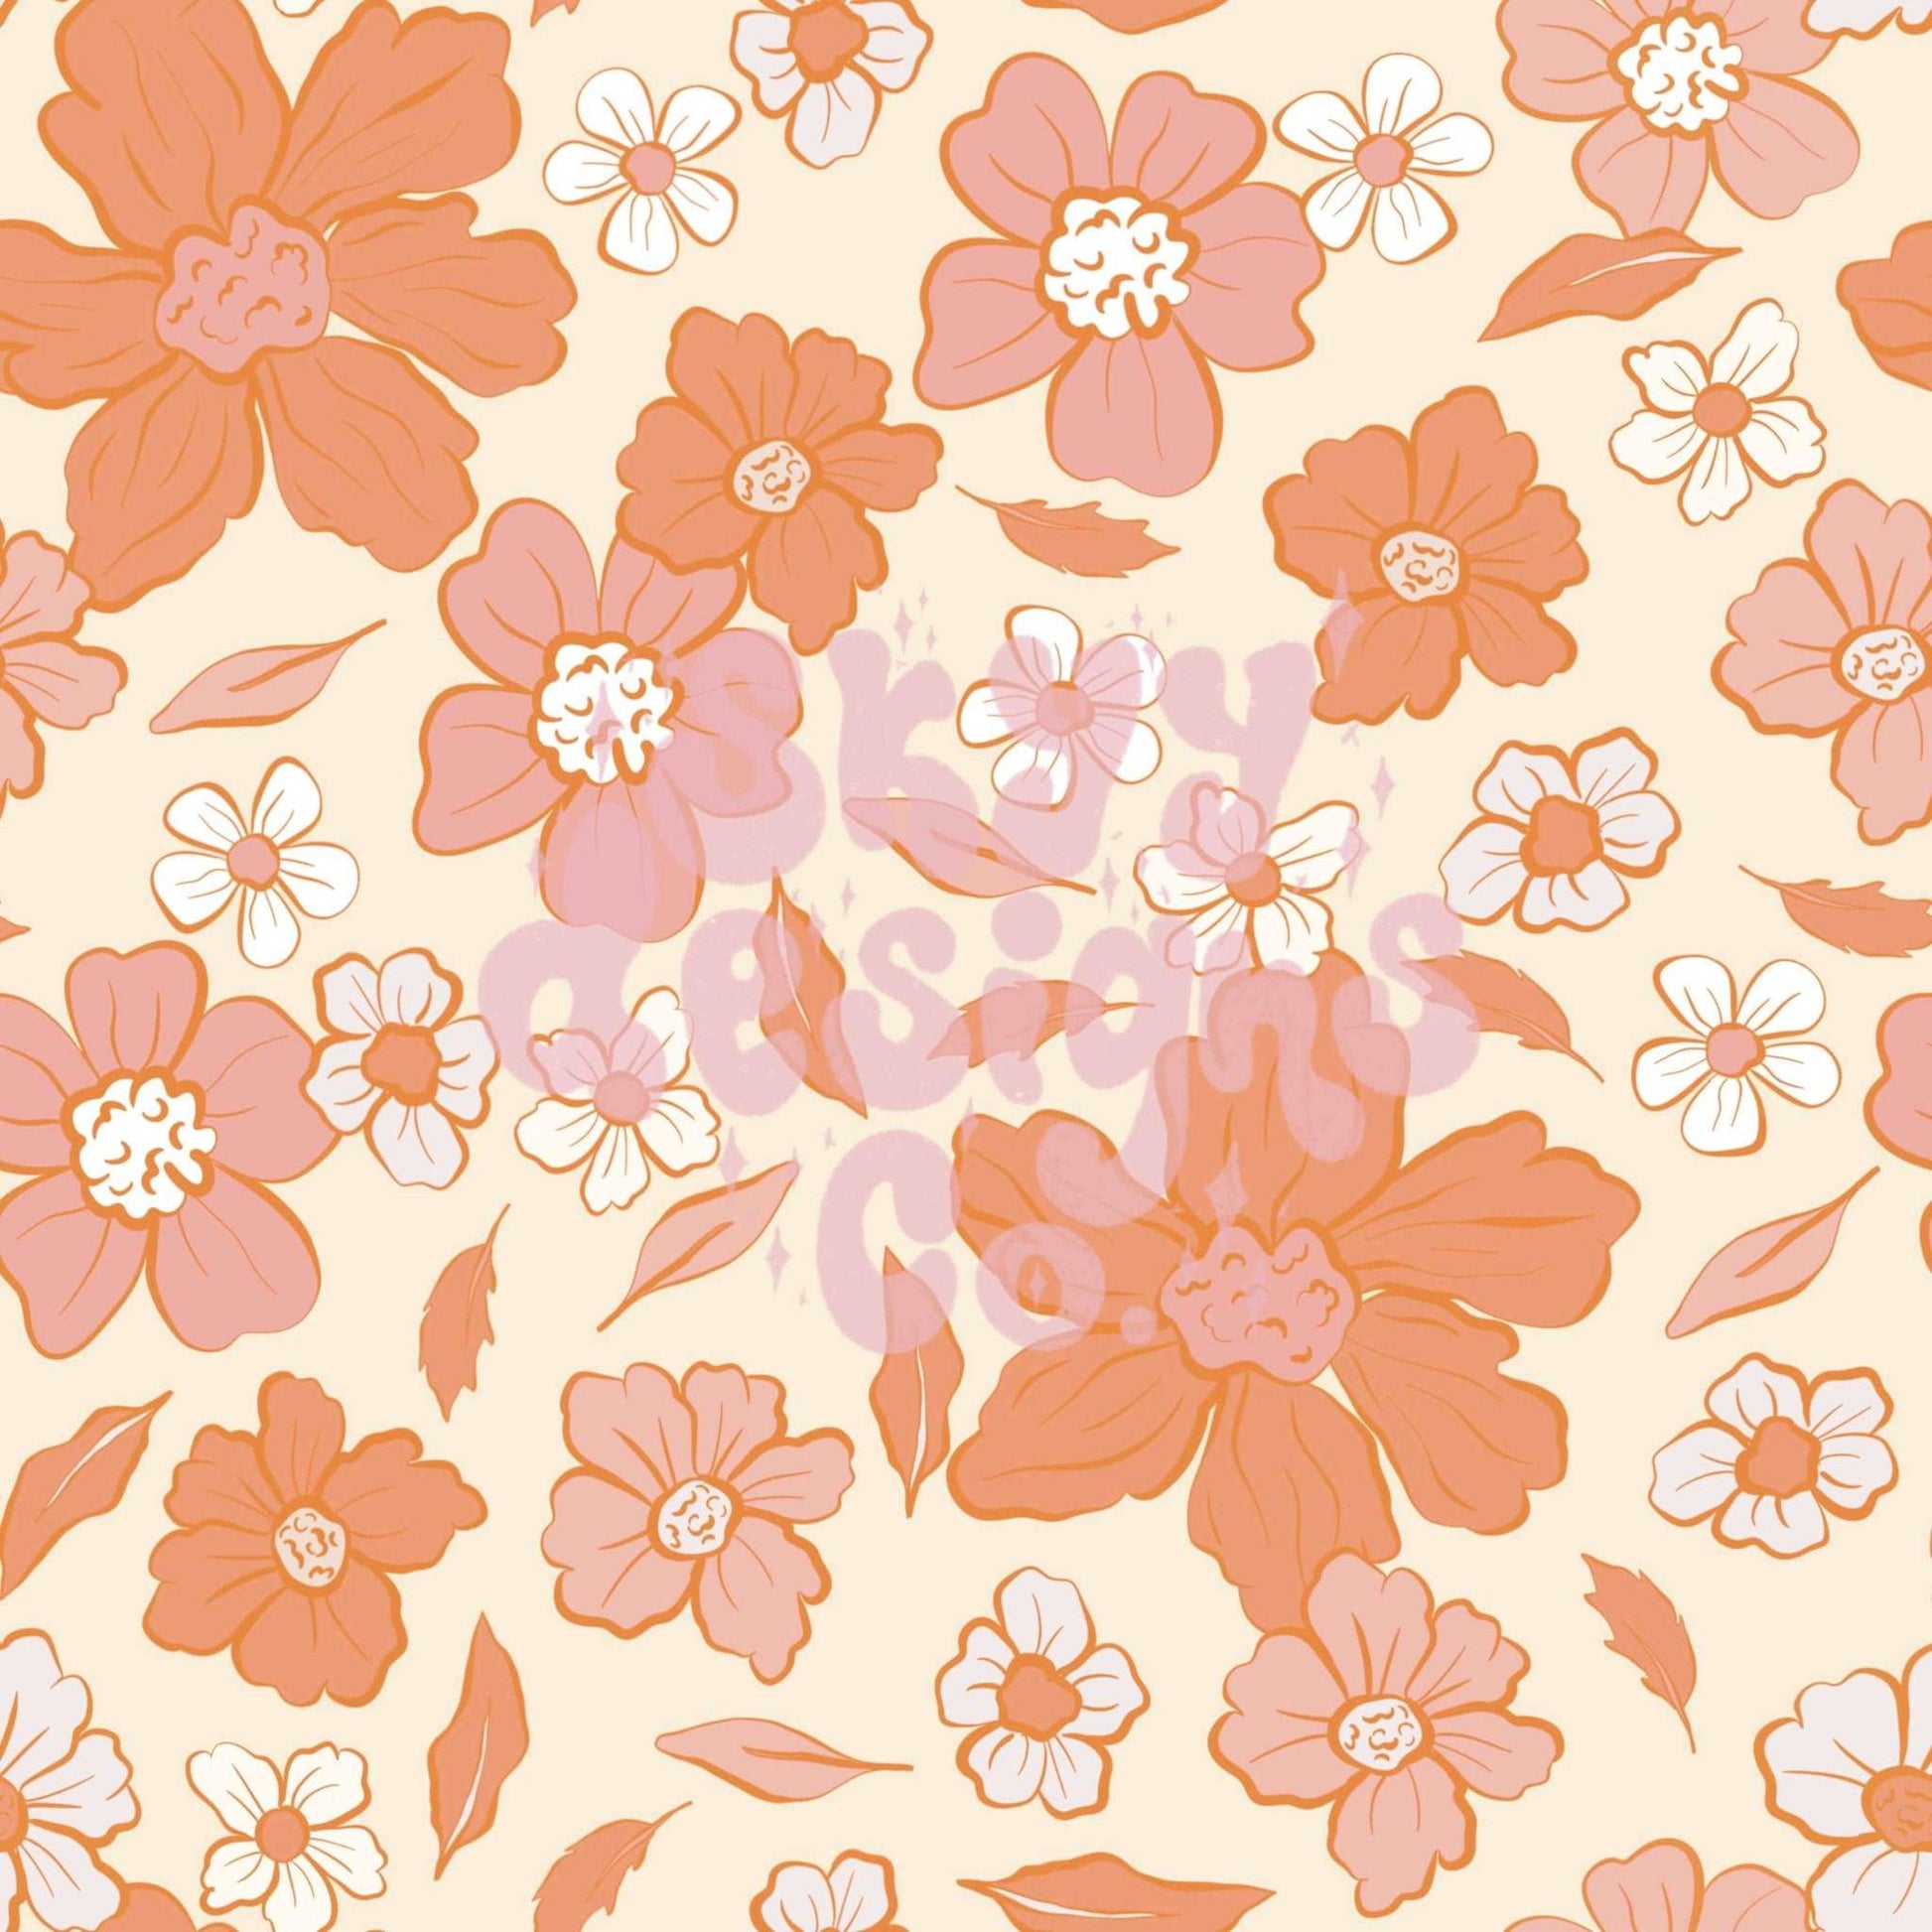 Boho fall leaves floral seamless repeat pattern - SkyyDesignsCo | Seamless Pattern Designs